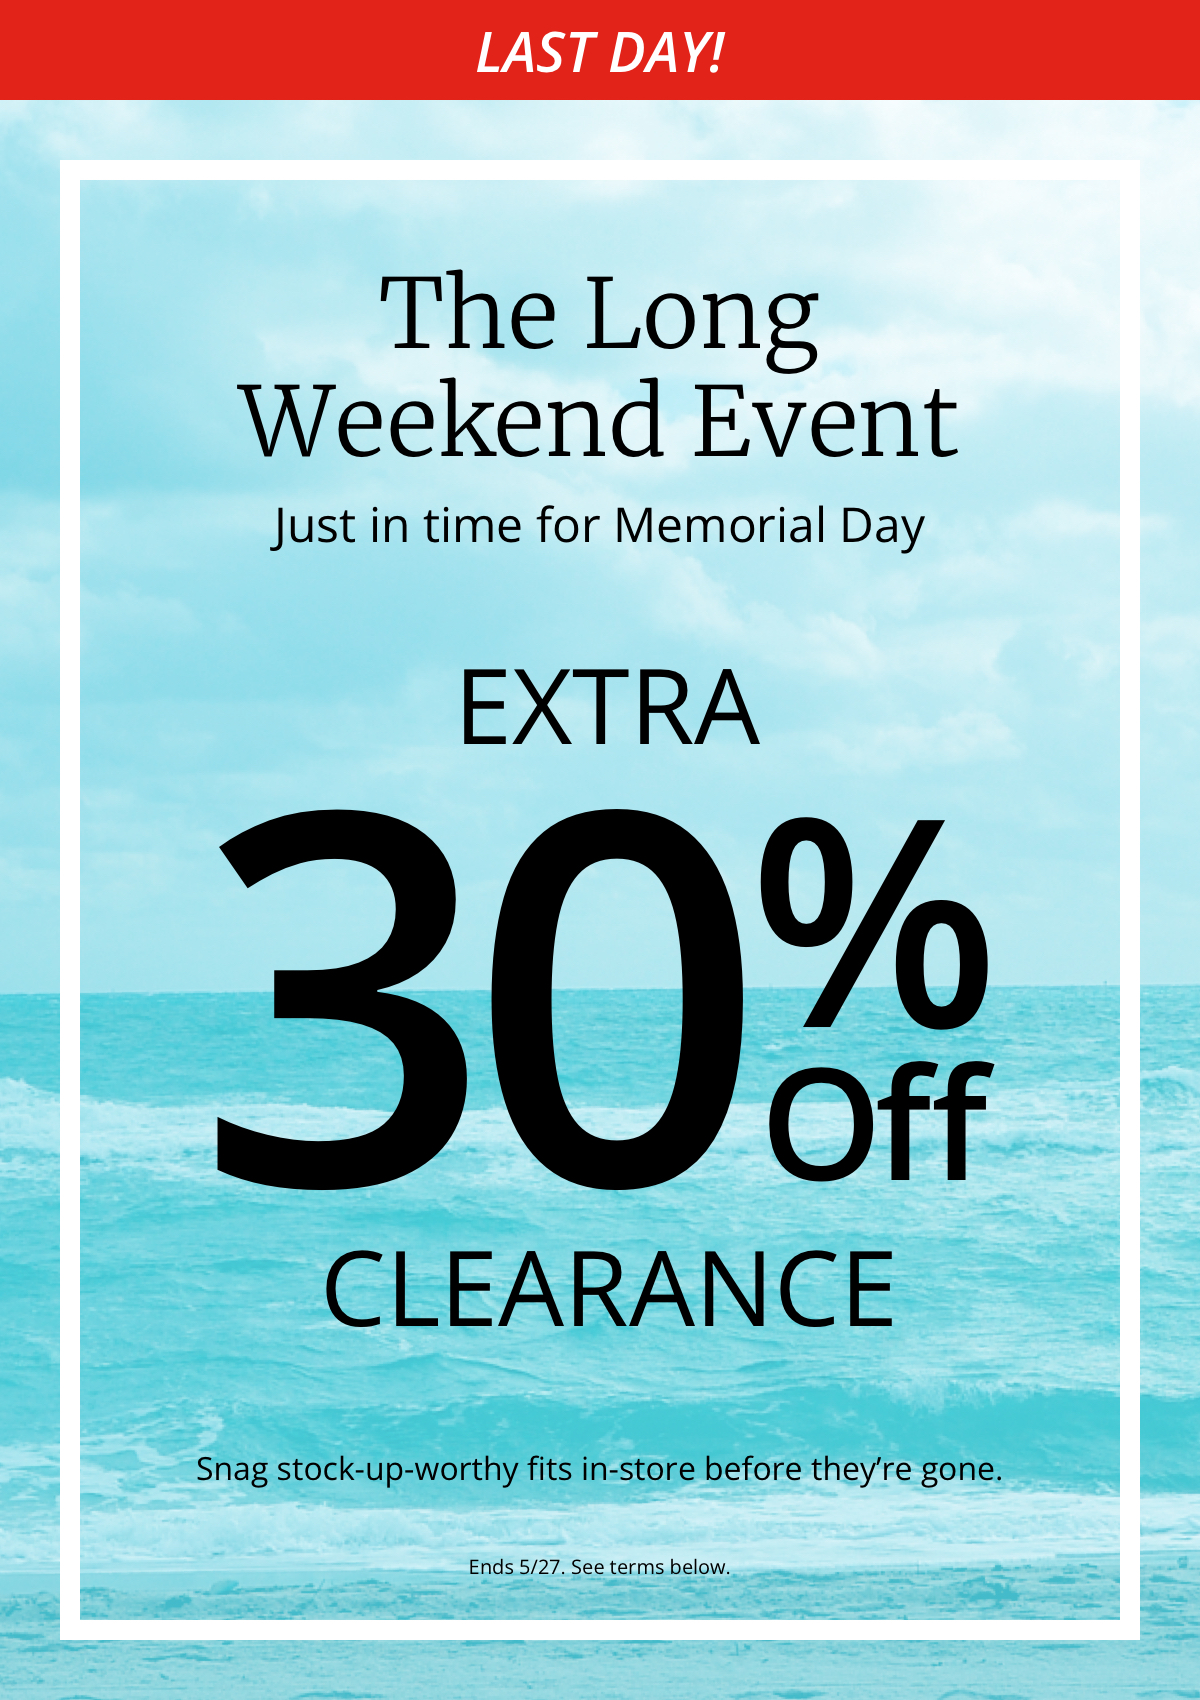 Last Day!|The Long|Weekend Event|Just in time for Memorial Day|Extra|30% Off| All Clearance|Snag stock-up-worthy fits in-store before theyre gone.|Ends 5/27. See terms below.